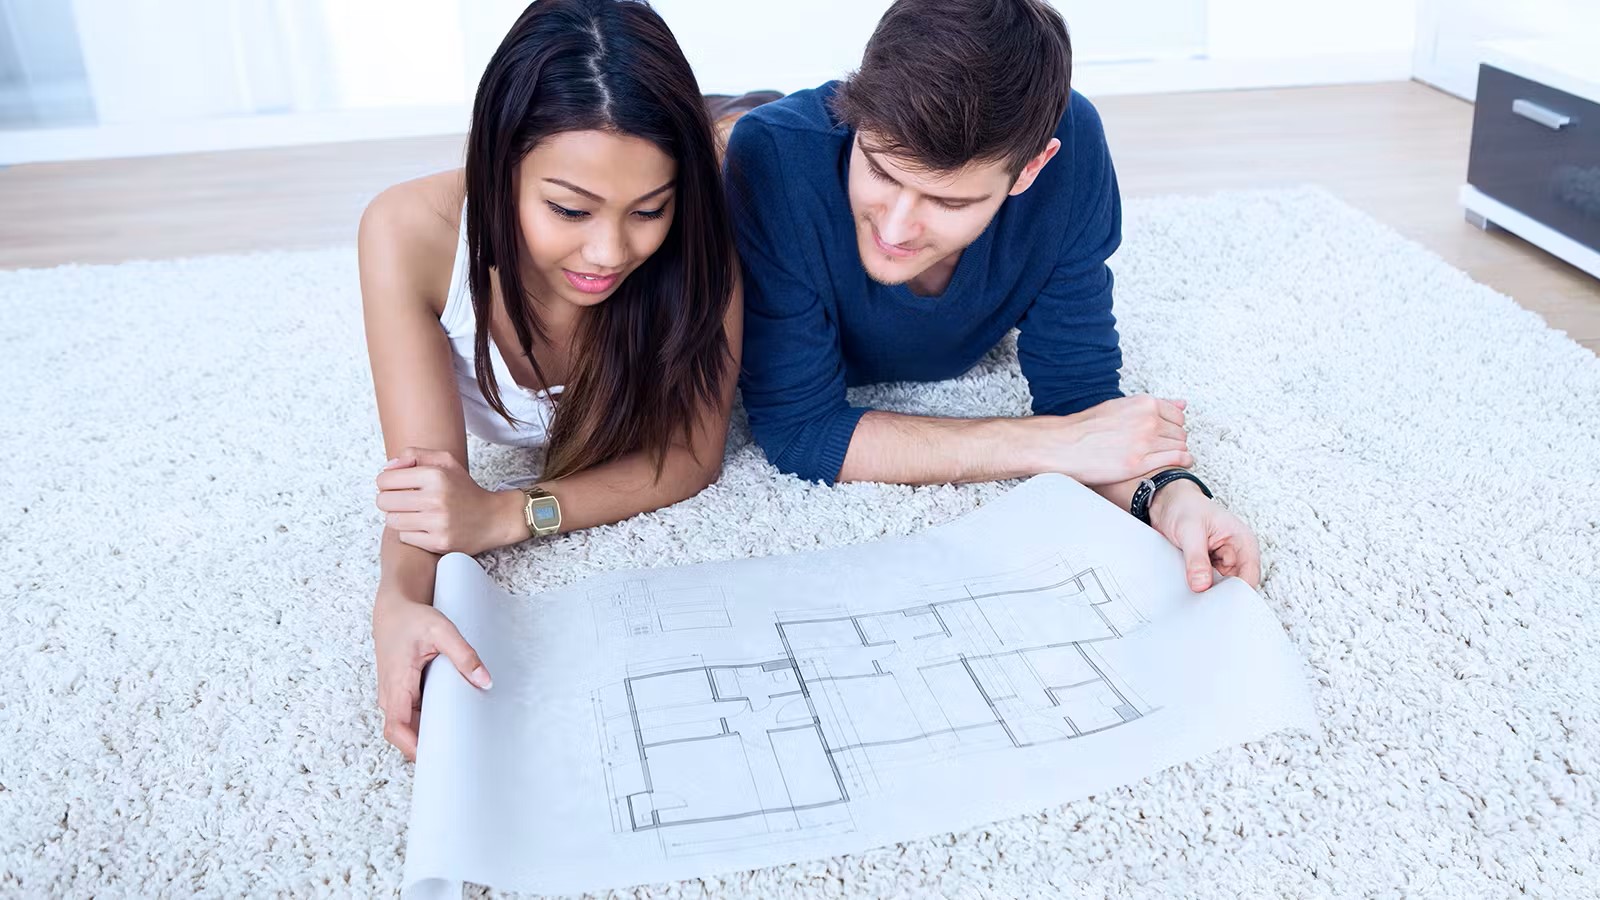 How To Finance The Renovation Of Your Home